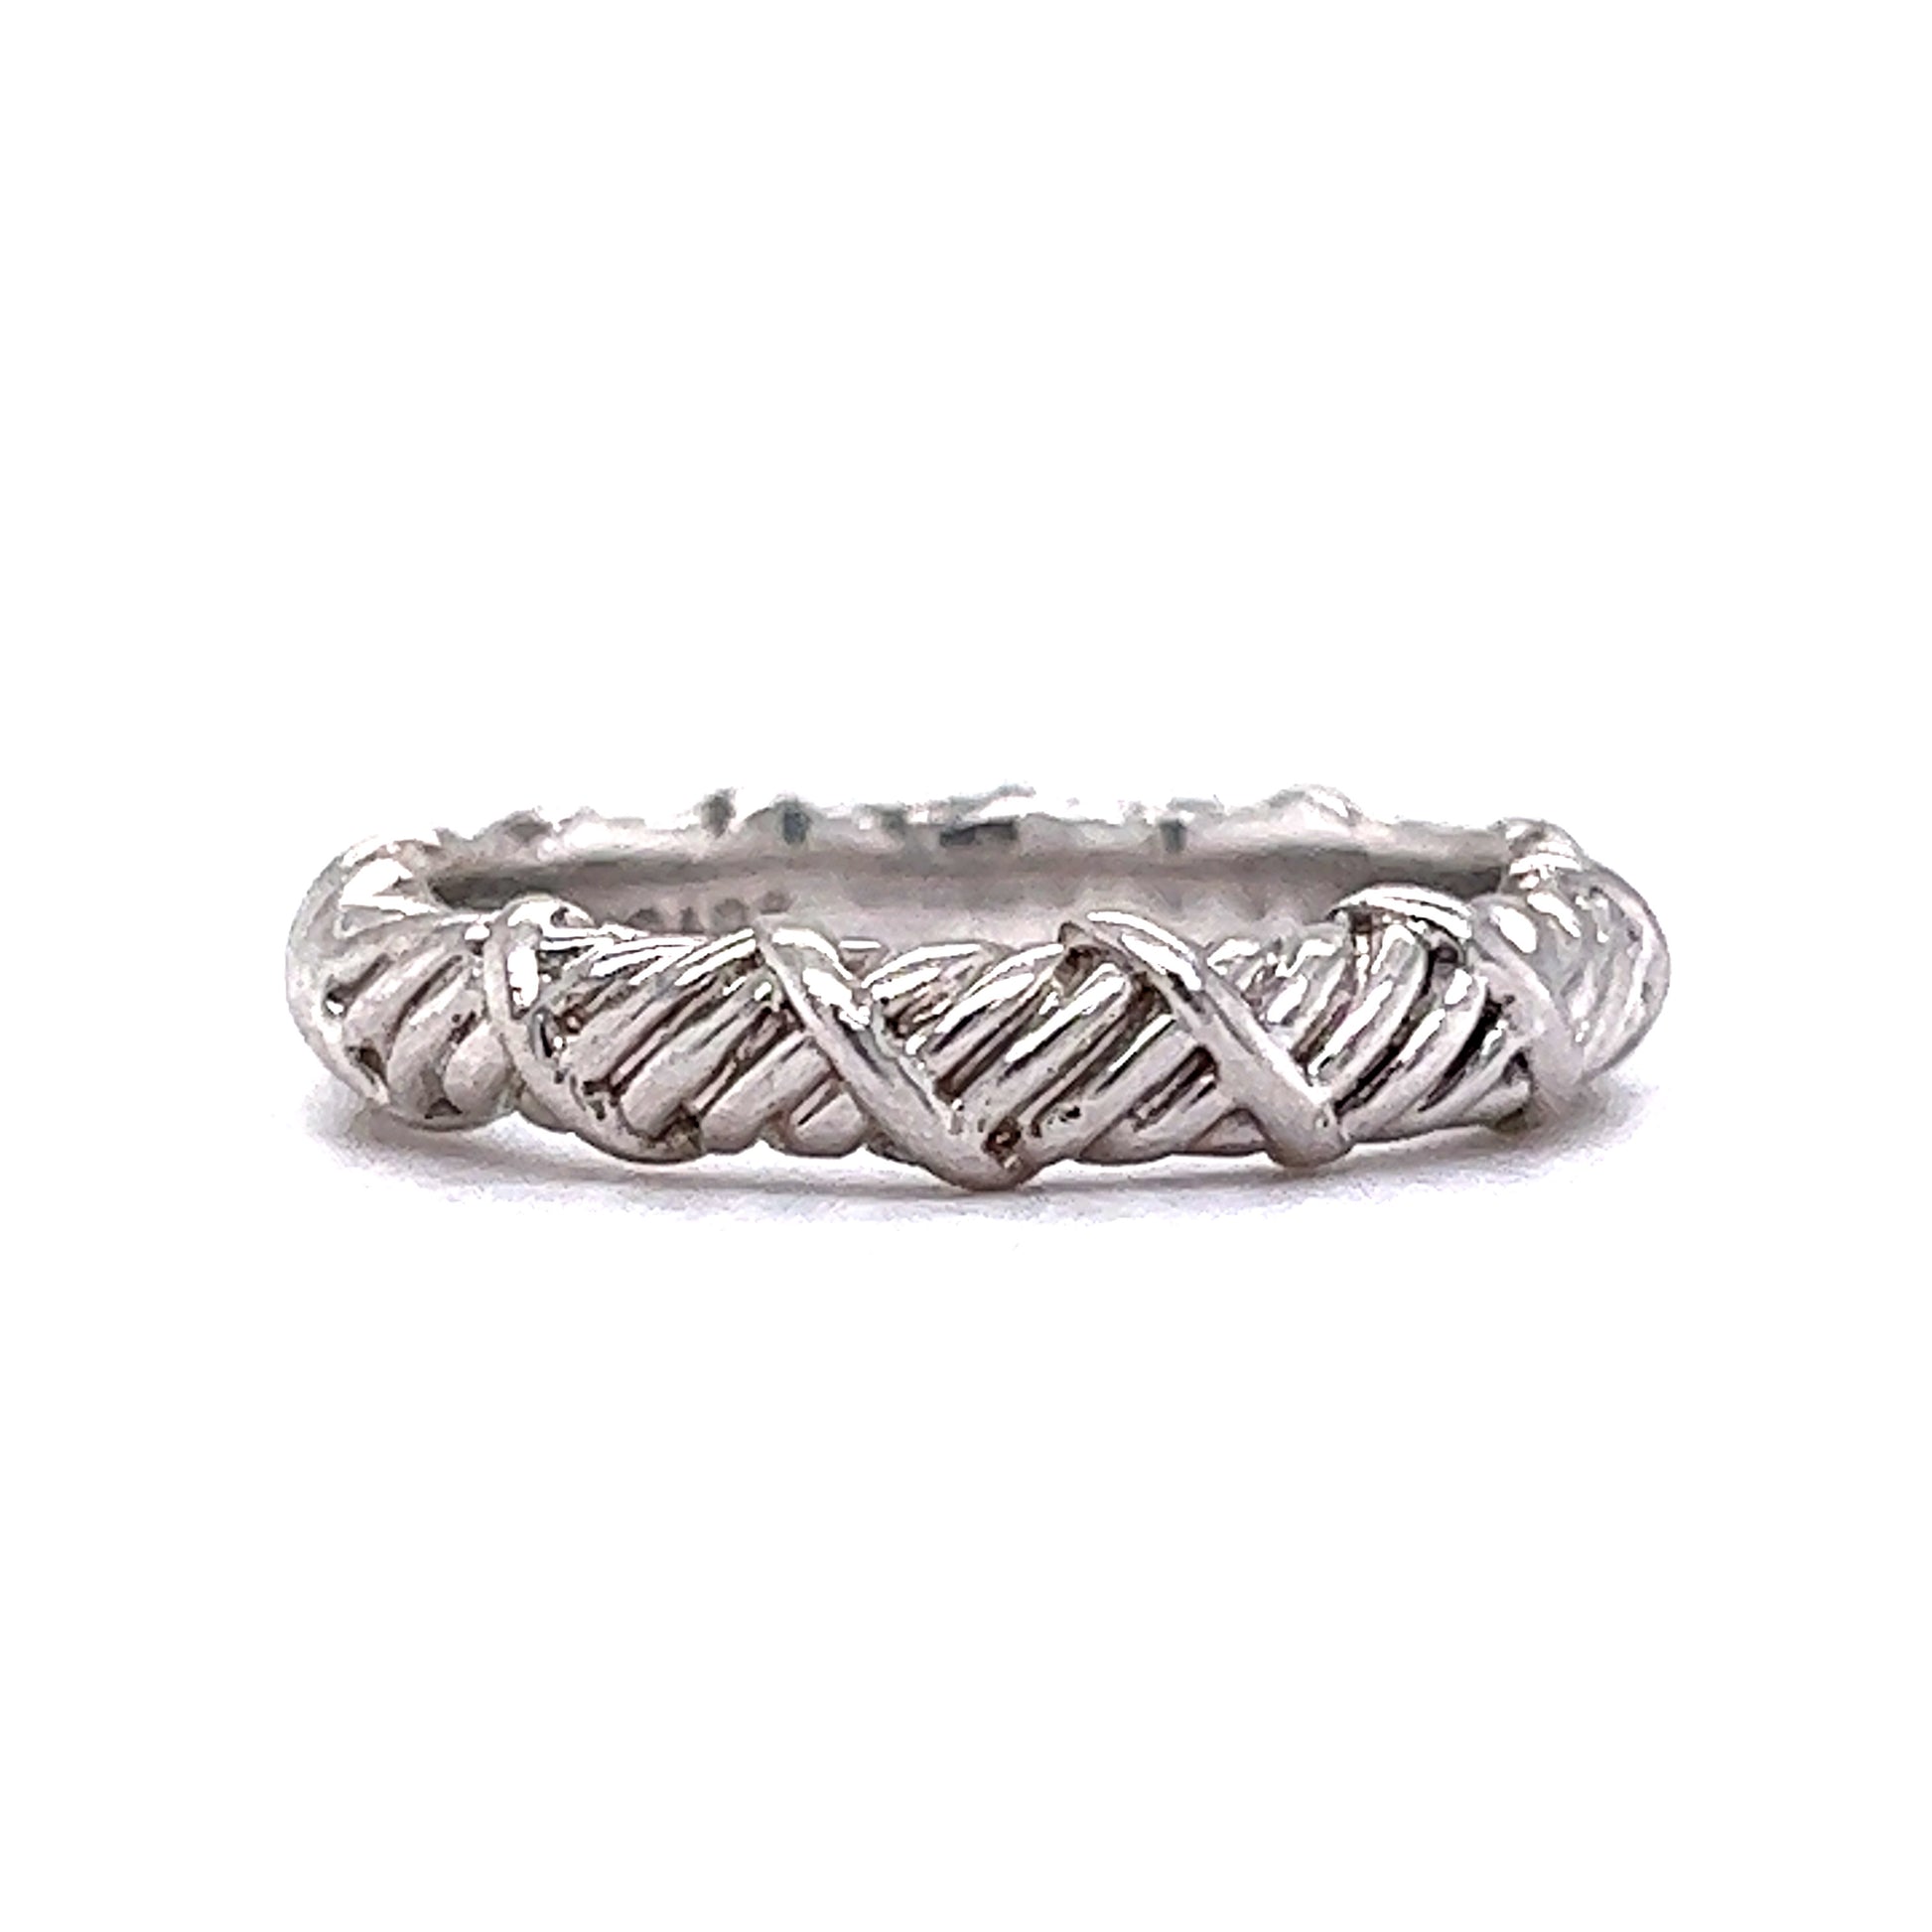  Handmade Wide Braided Ring, Unique Wedding Band Woman, White Gold  rings for women, twisted ring band : Handmade Products